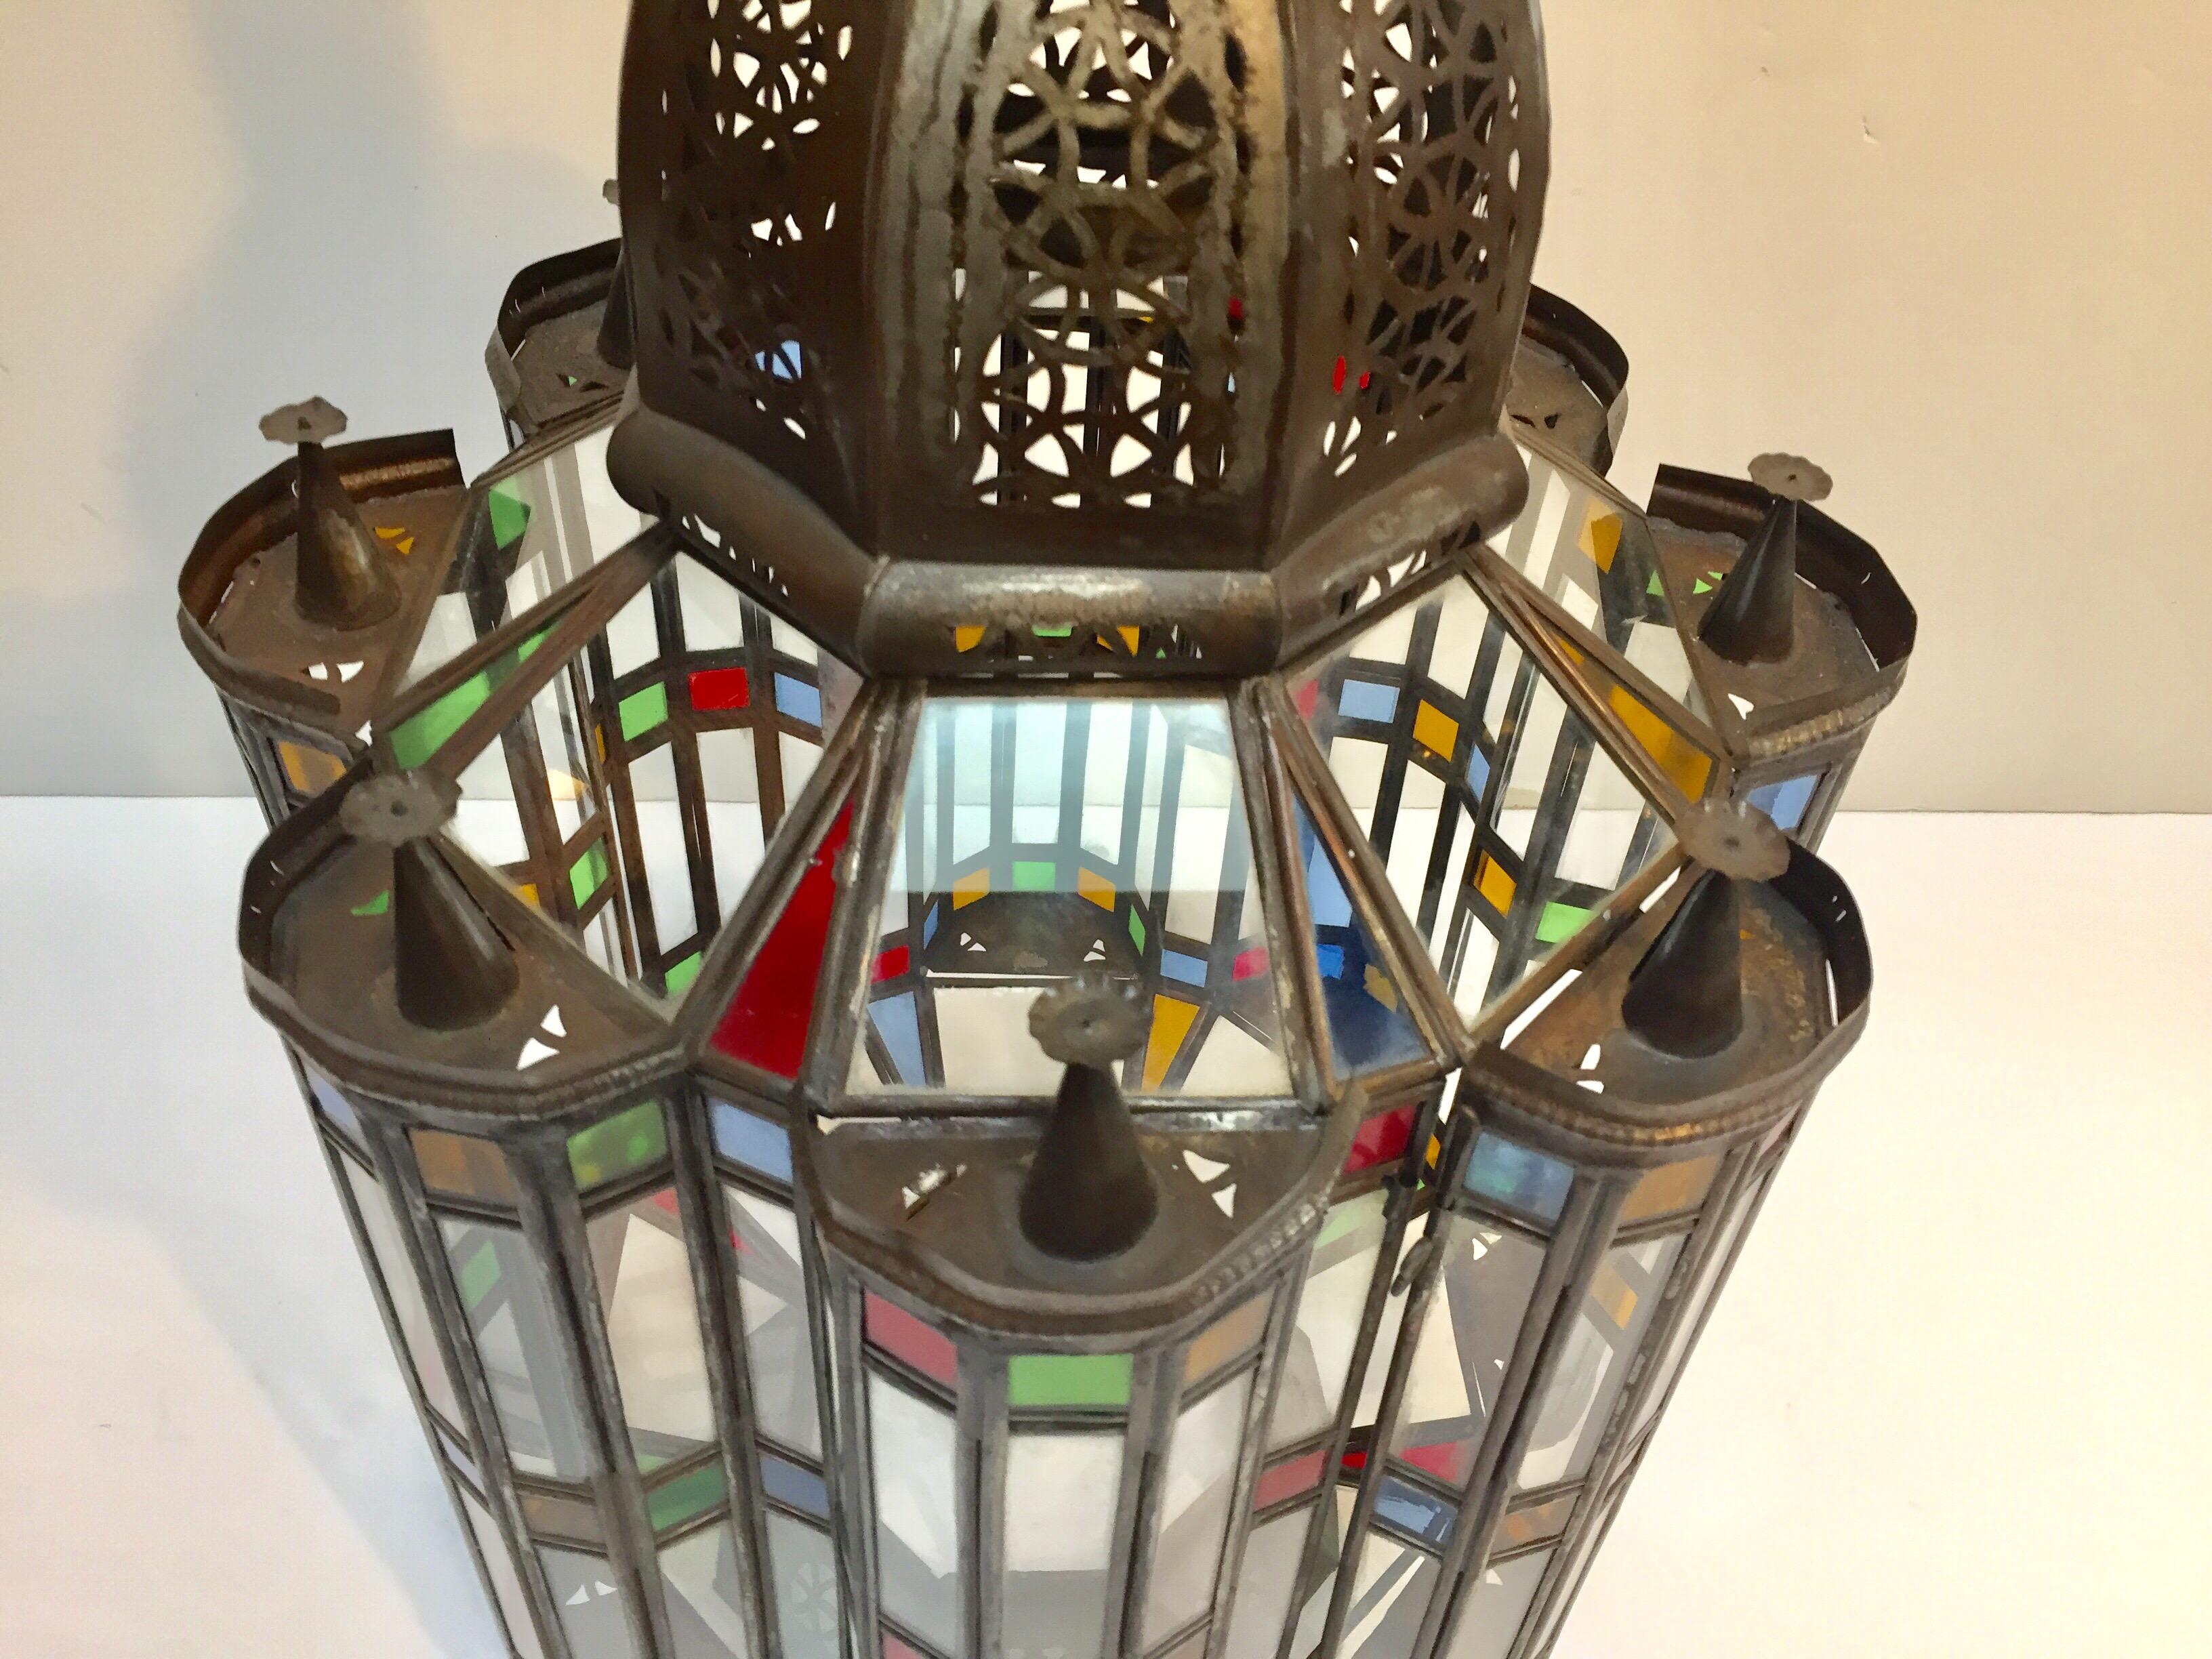 Large glass Moroccan Mamounia lantern with Moorish design.
Elegant Impressive intricate pierced metal and glass Moroccan lantern, 29 inches tall with clear, blue, green, red and gold blown glass all around.
Very fine craftsmanship, antiqued bronze